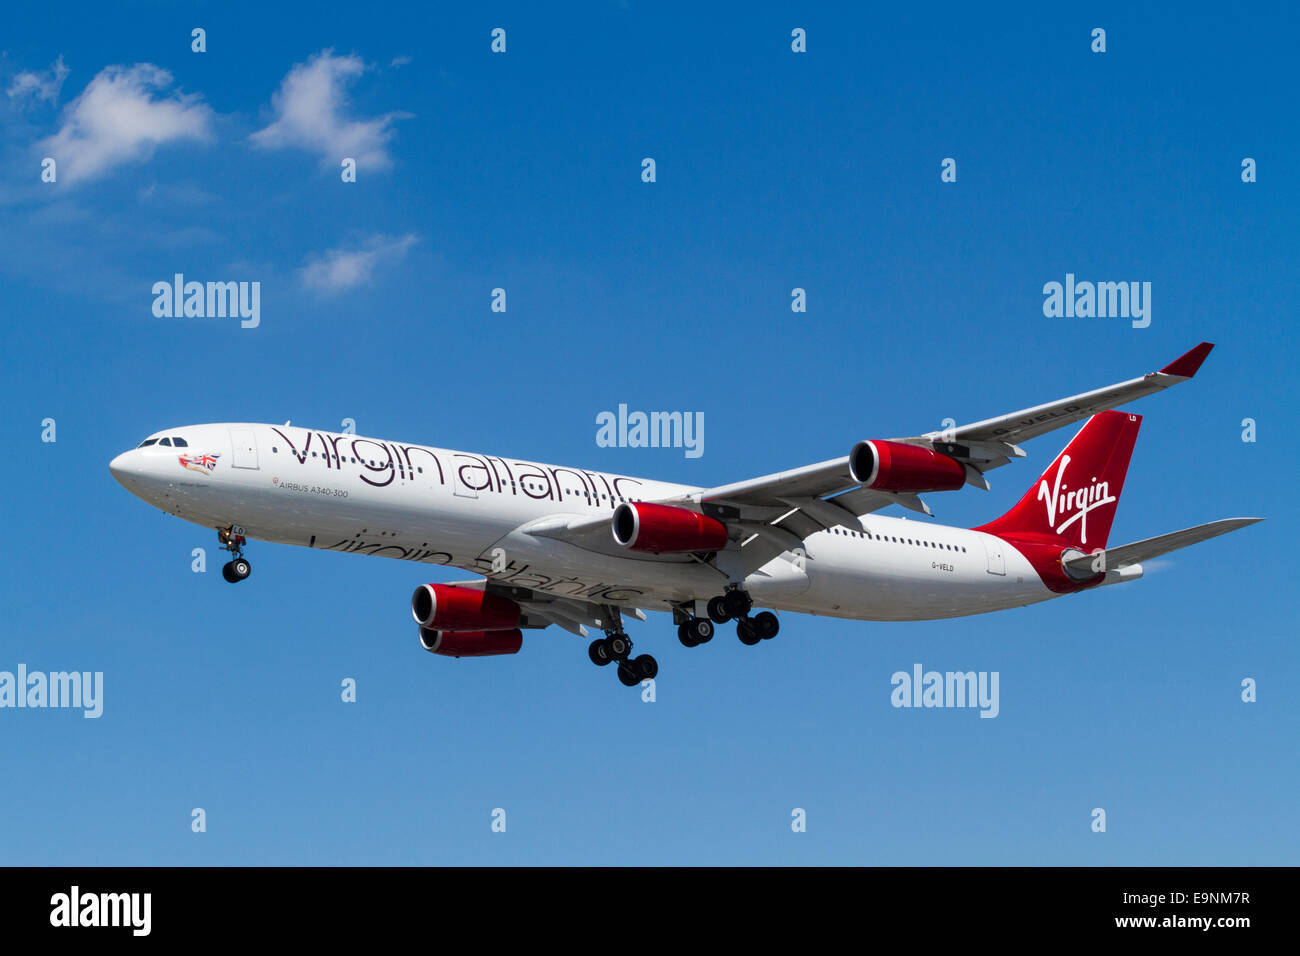 Virgin Atlantic Airbus A340-300 plane, G-VELD, African Queen, on its approach for landing at London Heathrow, England, UK Stock Photo